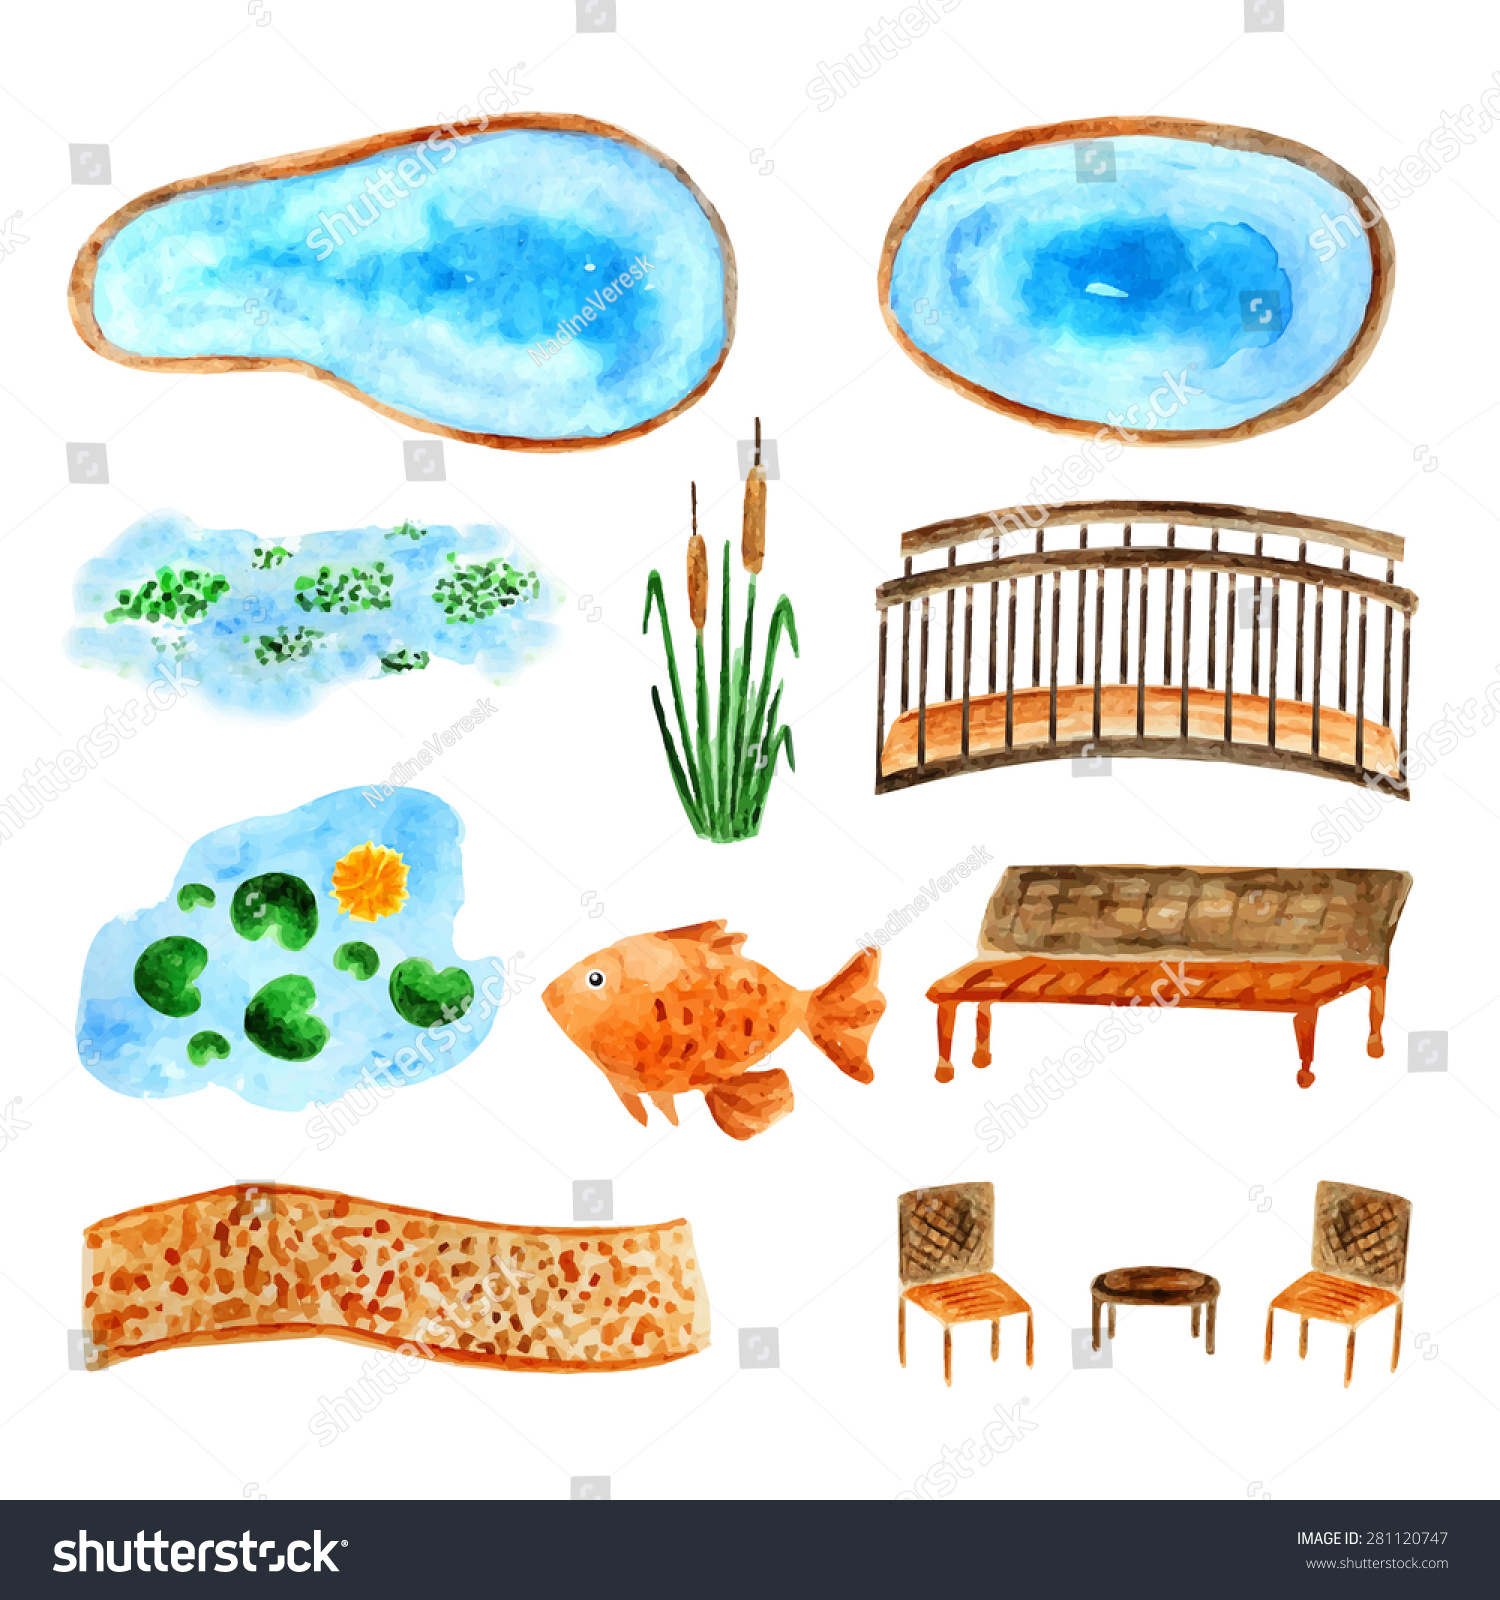 SVG of Collection of watercolor landscape elements, pools, water plants, garden furniture svg